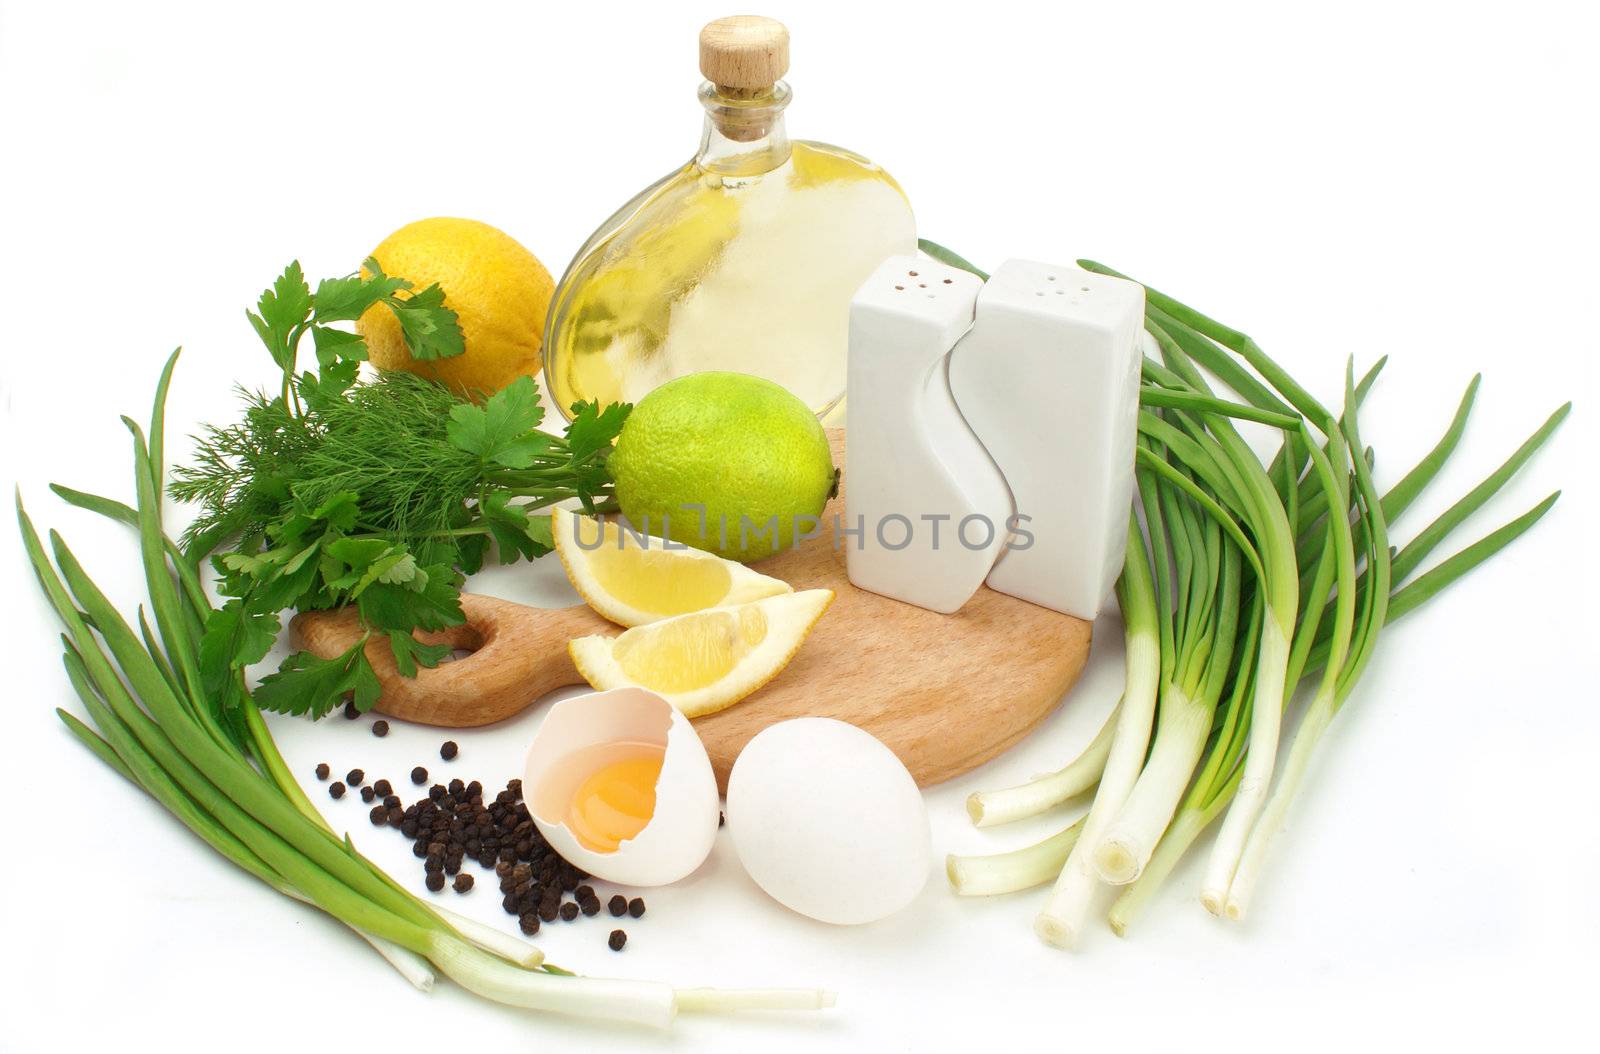 mayonnaise ingredients by Zloneg